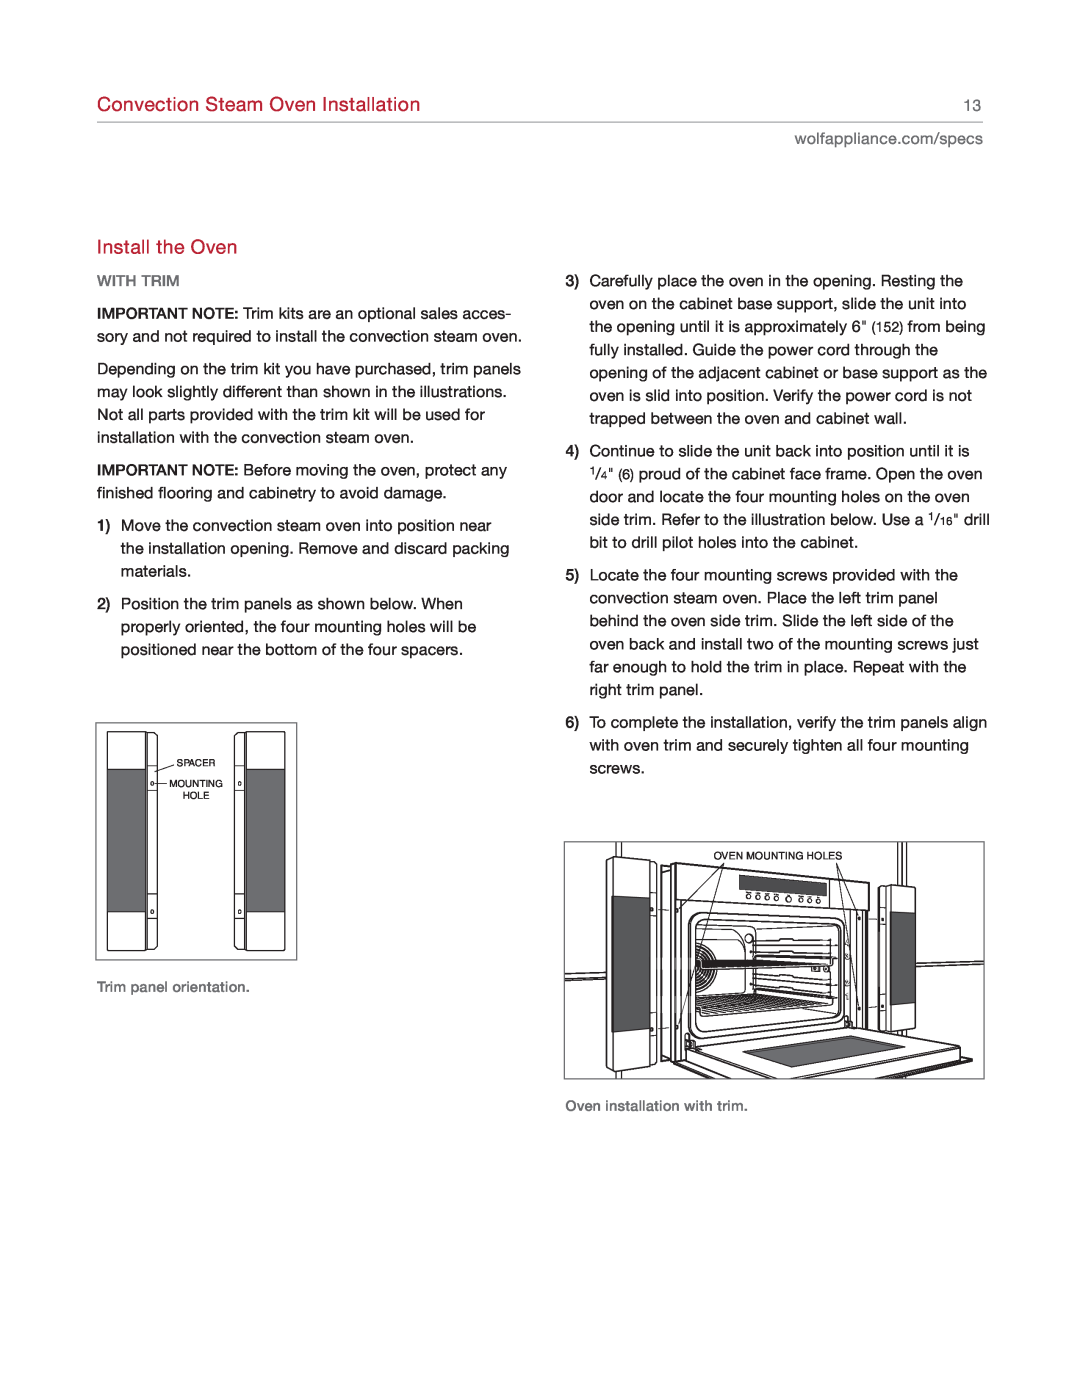 Sub-Zero CSO24 manual With Trim, Convection Steam Oven Installation, Install the Oven, Trim panel orientation 